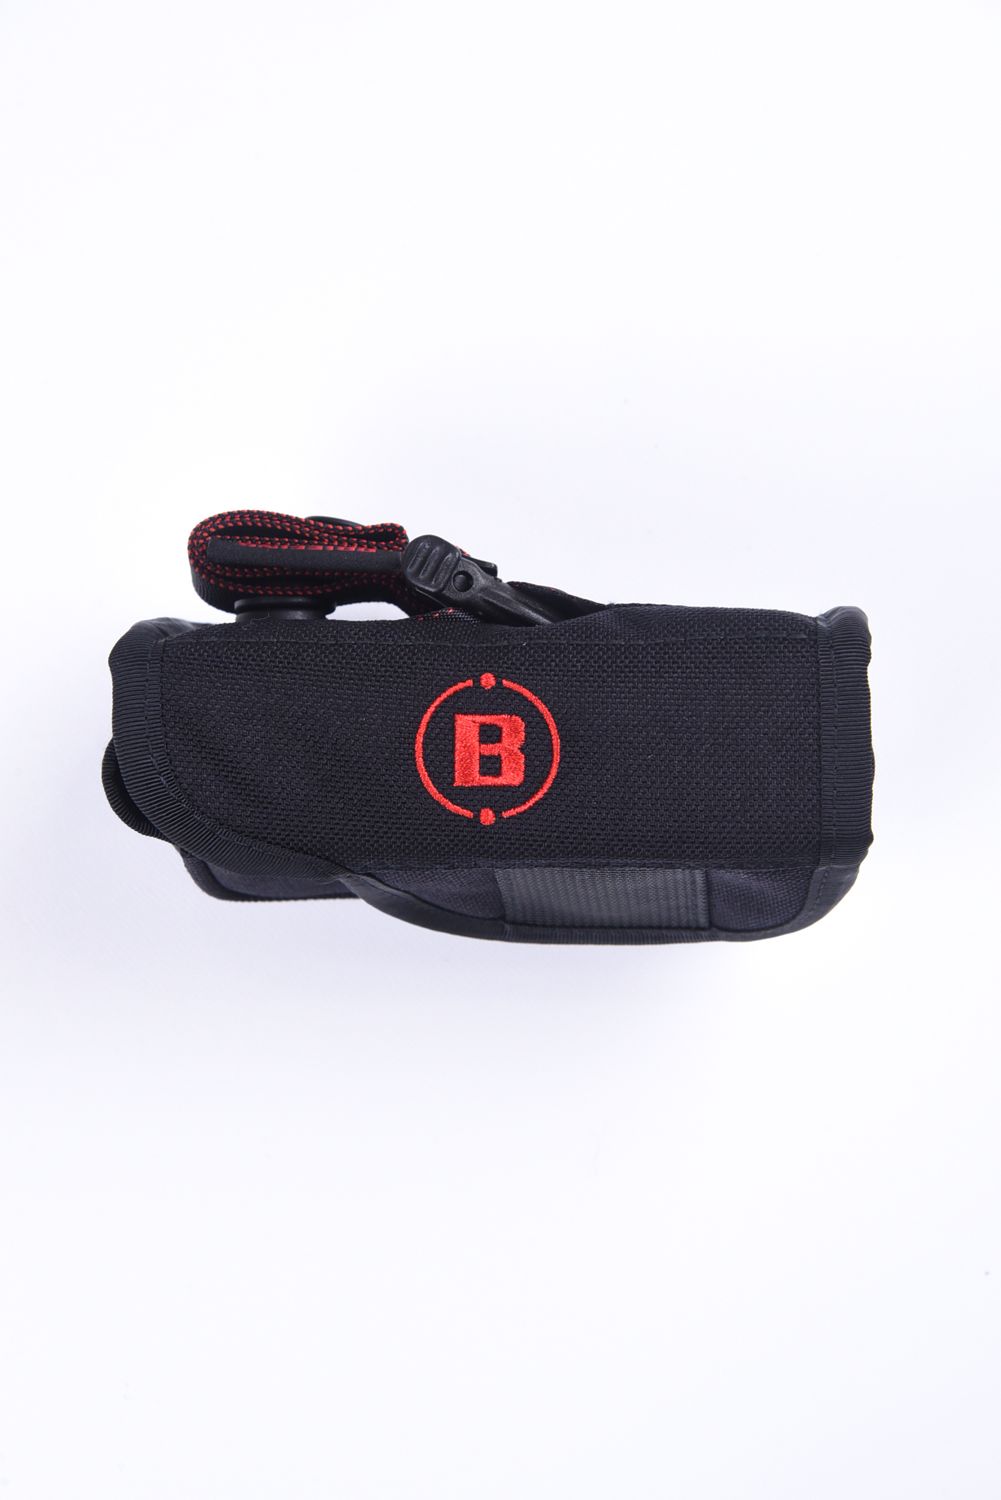 BRIEFING - 【1000Dコーデュラナイロン】 HALF MALLET PUTTER COVER